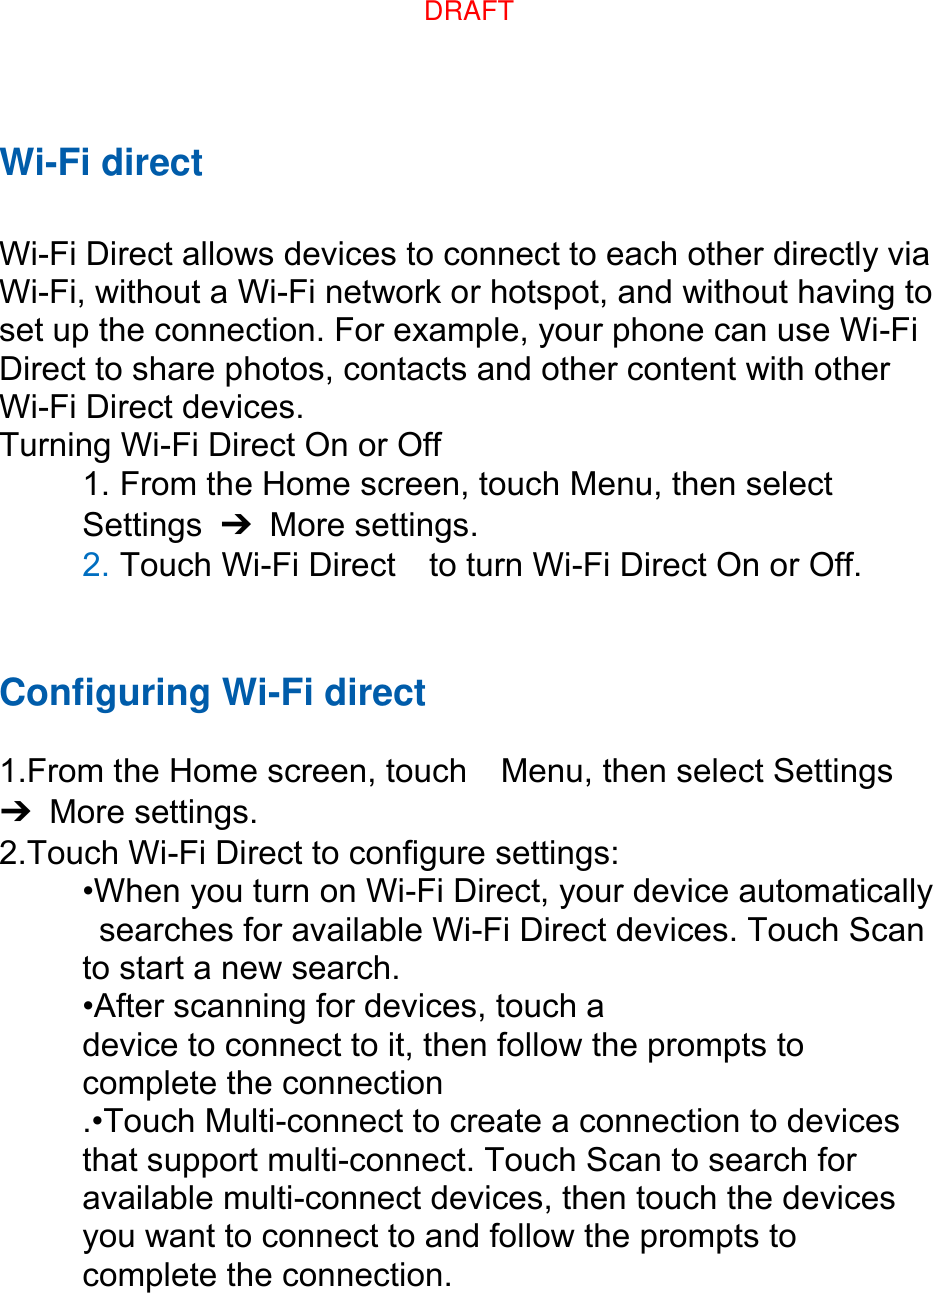 Wi-Fi direct  Wi-Fi Direct allows devices to connect to each other directly via Wi-Fi, without a Wi-Fi network or hotspot, and without having to set up the connection. For example, your phone can use Wi-Fi Direct to share photos, contacts and other content with other Wi-Fi Direct devices.   Turning Wi-Fi Direct On or Off 1. From the Home screen, touch Menu, then select   Settings  ➔  More settings. 2. Touch Wi-Fi Direct    to turn Wi-Fi Direct On or Off.   Configuring Wi-Fi direct    1.From the Home screen, touch    Menu, then select Settings ➔  More settings. 2.Touch Wi-Fi Direct to configure settings:   •When you turn on Wi-Fi Direct, your device automatically   searches for available Wi-Fi Direct devices. Touch Scan   to start a new search. •After scanning for devices, touch a   device to connect to it, then follow the prompts to   complete the connection .•Touch Multi-connect to create a connection to devices that support multi-connect. Touch Scan to search for available multi-connect devices, then touch the devices you want to connect to and follow the prompts to complete the connection.DRAFT